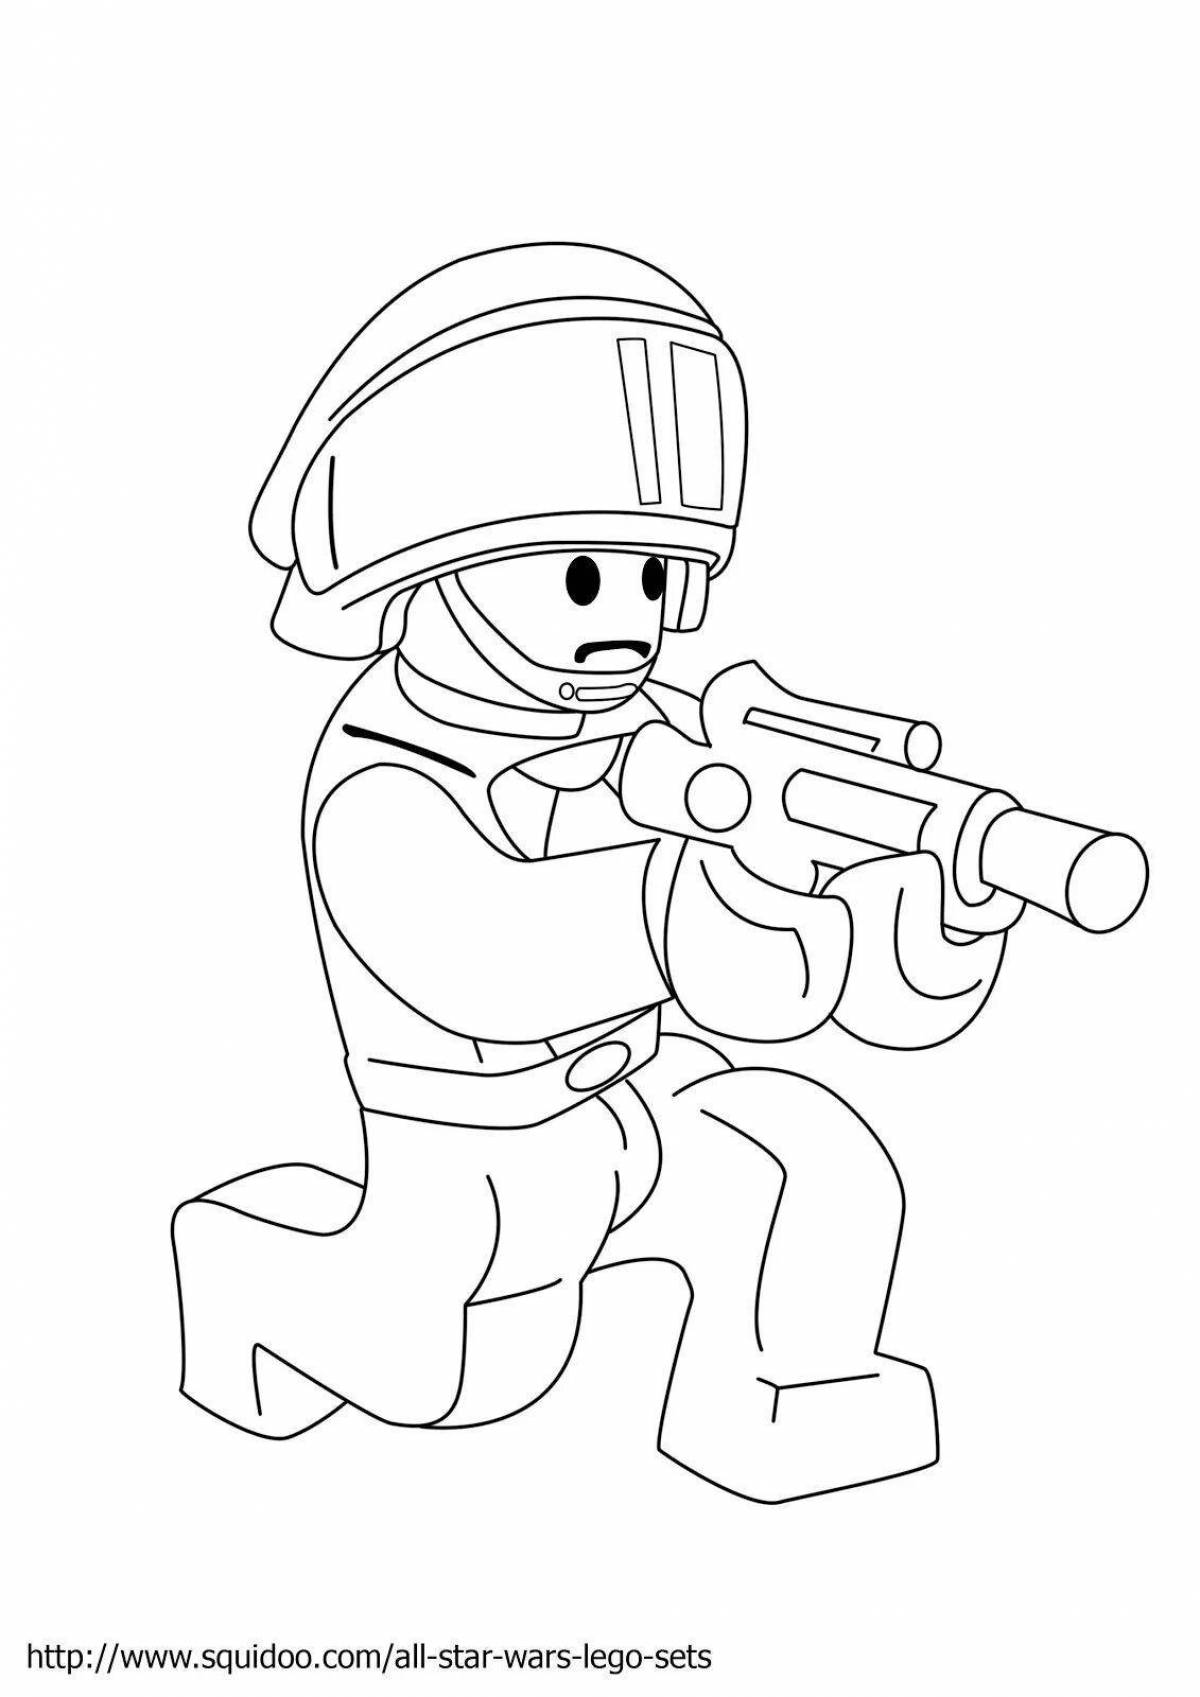 Awesome lego toy soldier coloring pages